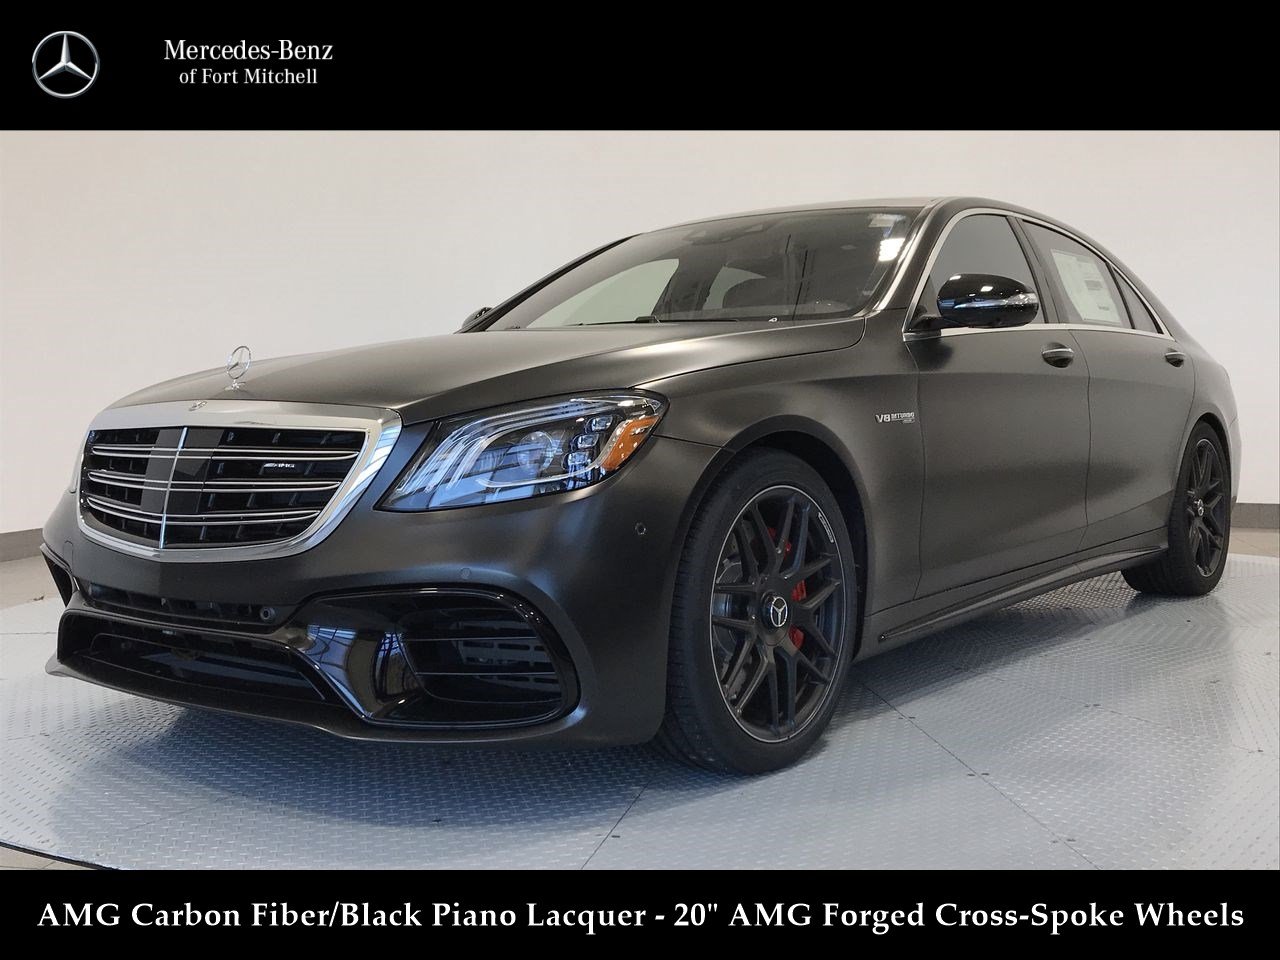 New 2020 Mercedes Benz S Class Amg S 63 Awd 4matic